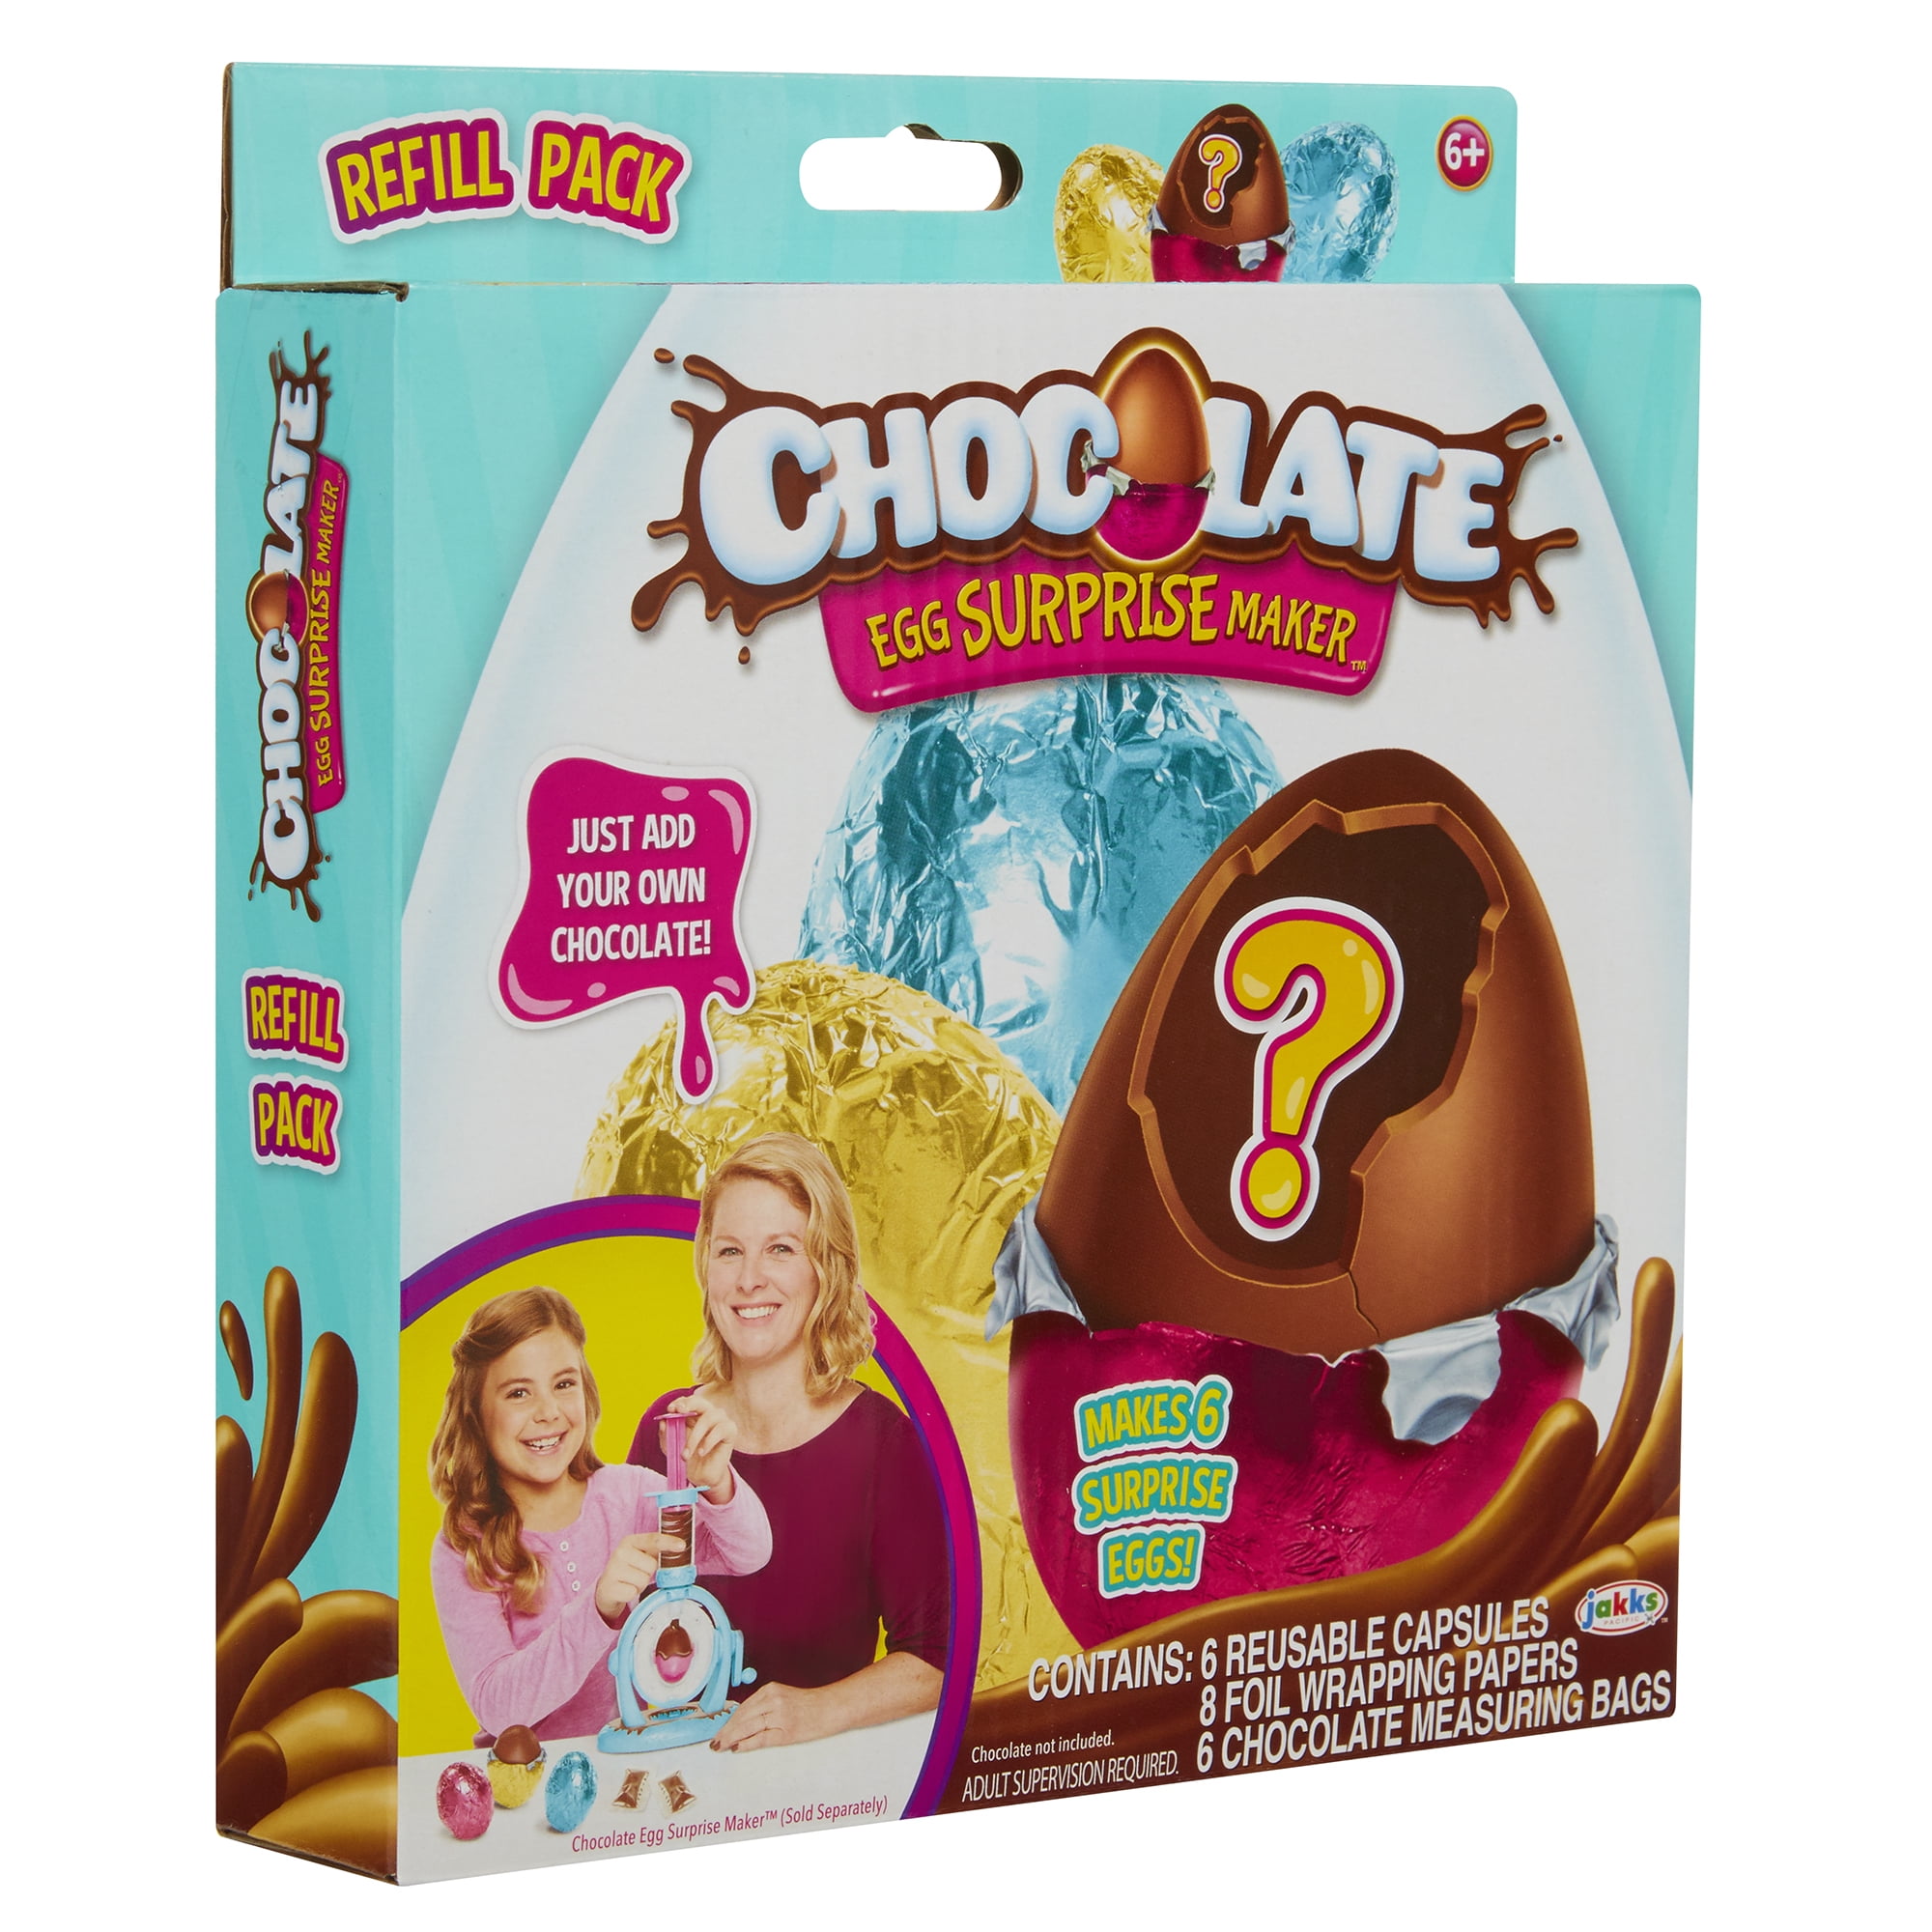 New Chocolate Egg Surprise Chocolate Egg Maker 